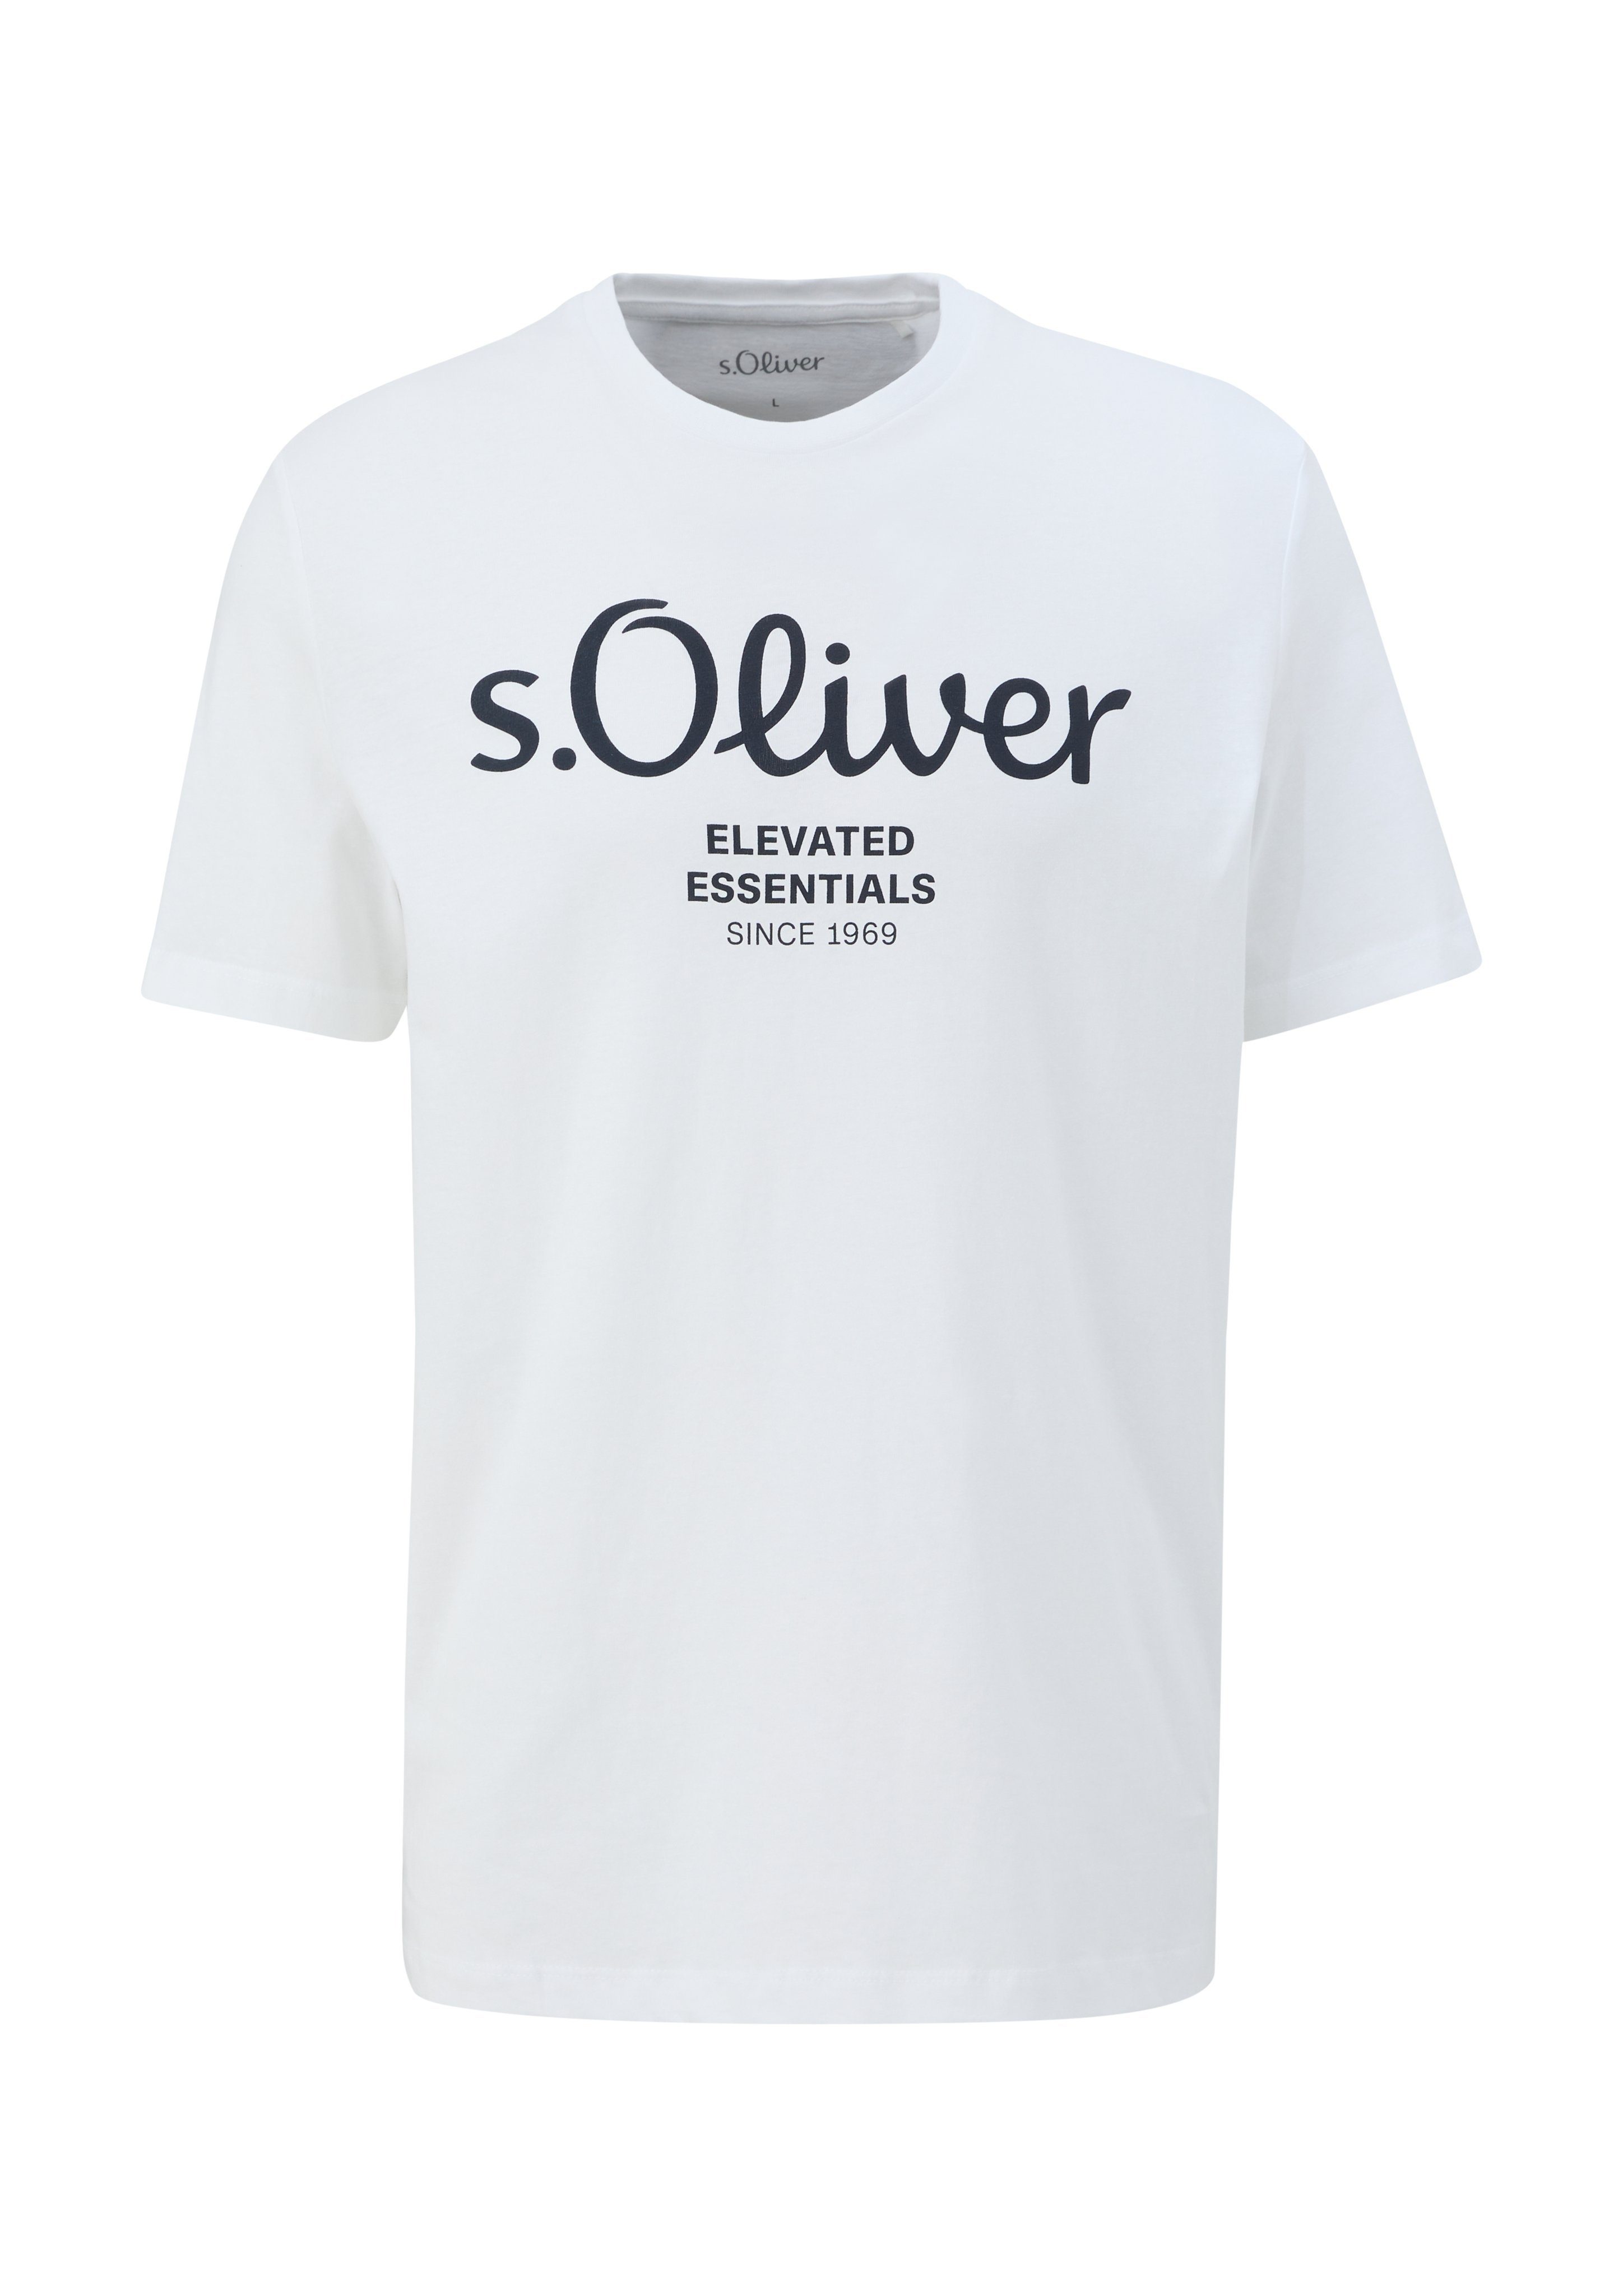 s.Oliver T-Shirt sportiven im white Look